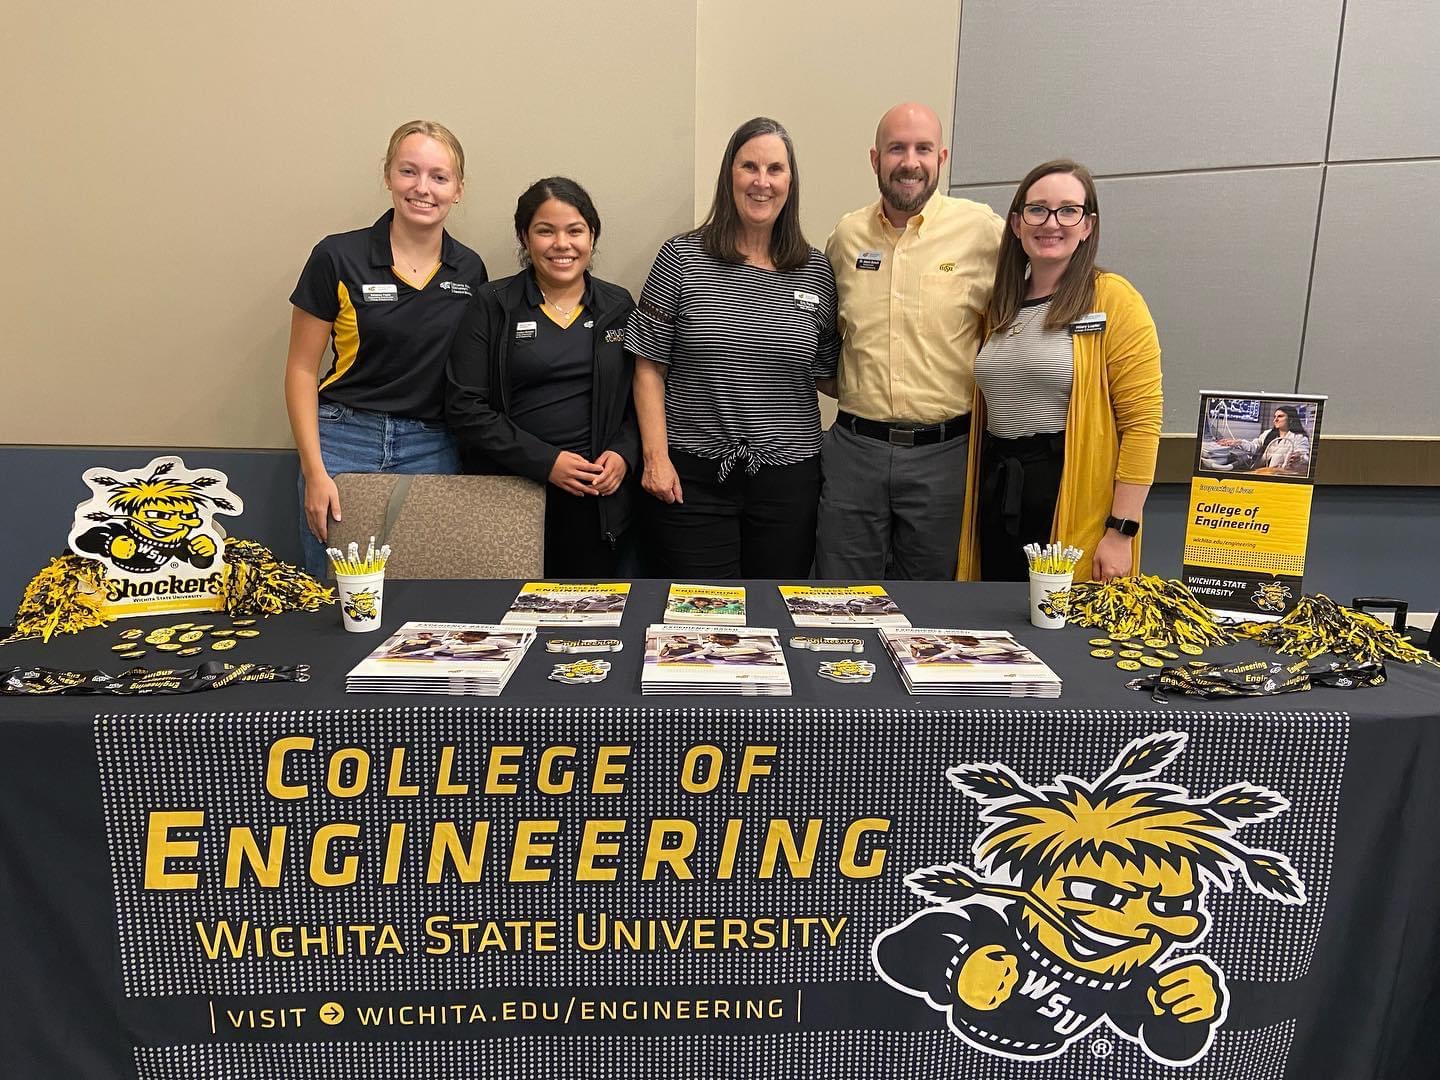 College of Engineering Staff and CoESA members stand behind a table at an event